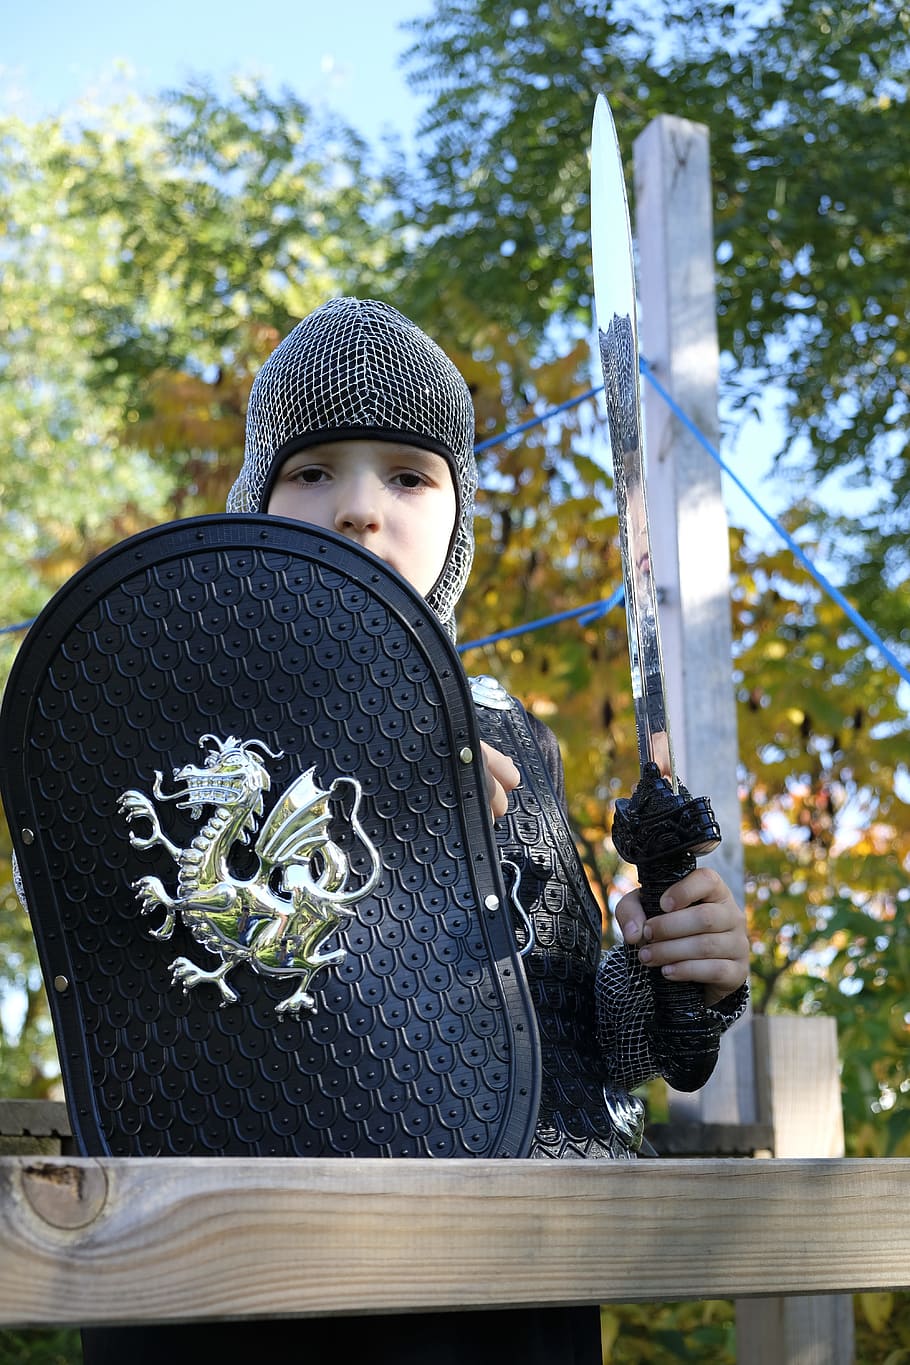 knight, ritterruestung, armor, child, play, protection, protect, fight, sword, weapon